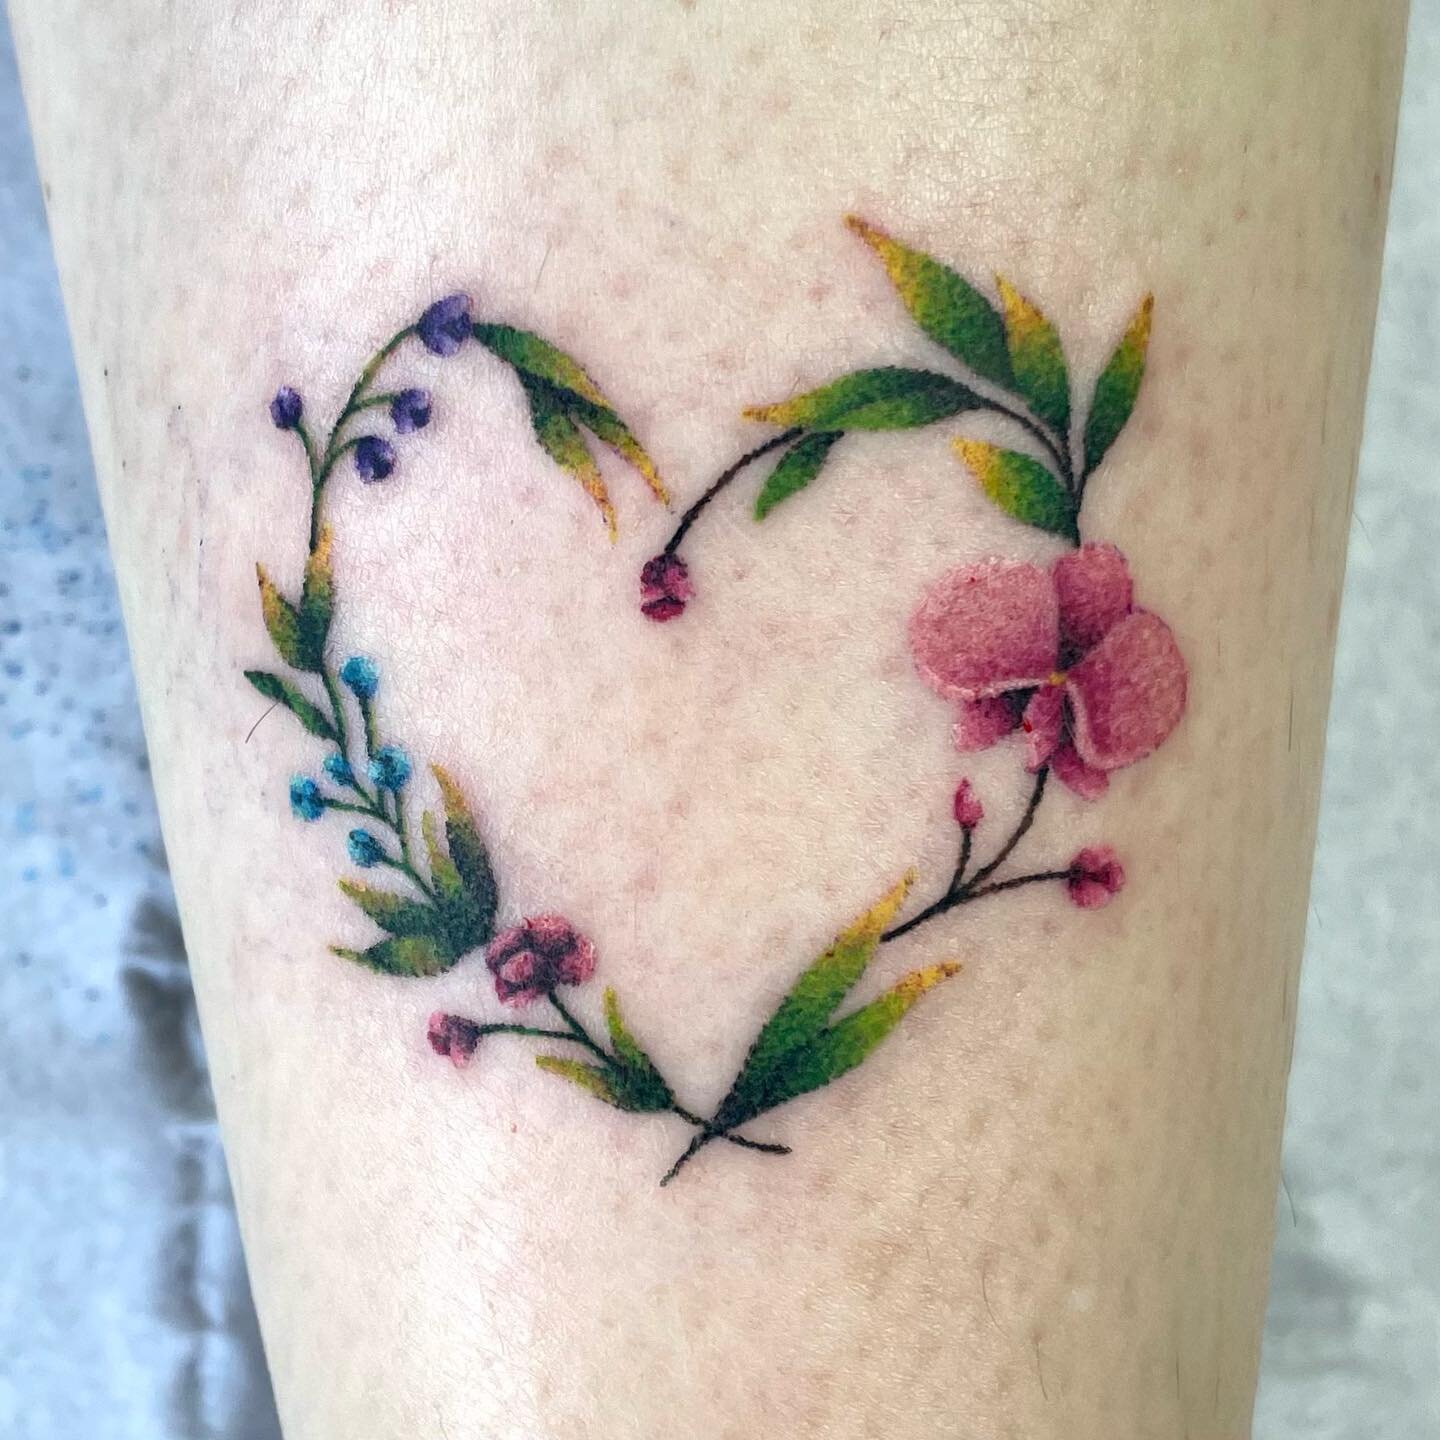 Tiny dotty flowers done by @amyrose.tattoo Amy has some great flash designs up for grabs and is excelling at these brilliant colour dotwork floral designs! Aswell as producing strong neo-Japanese designs and black work tattoos! Check her work out and